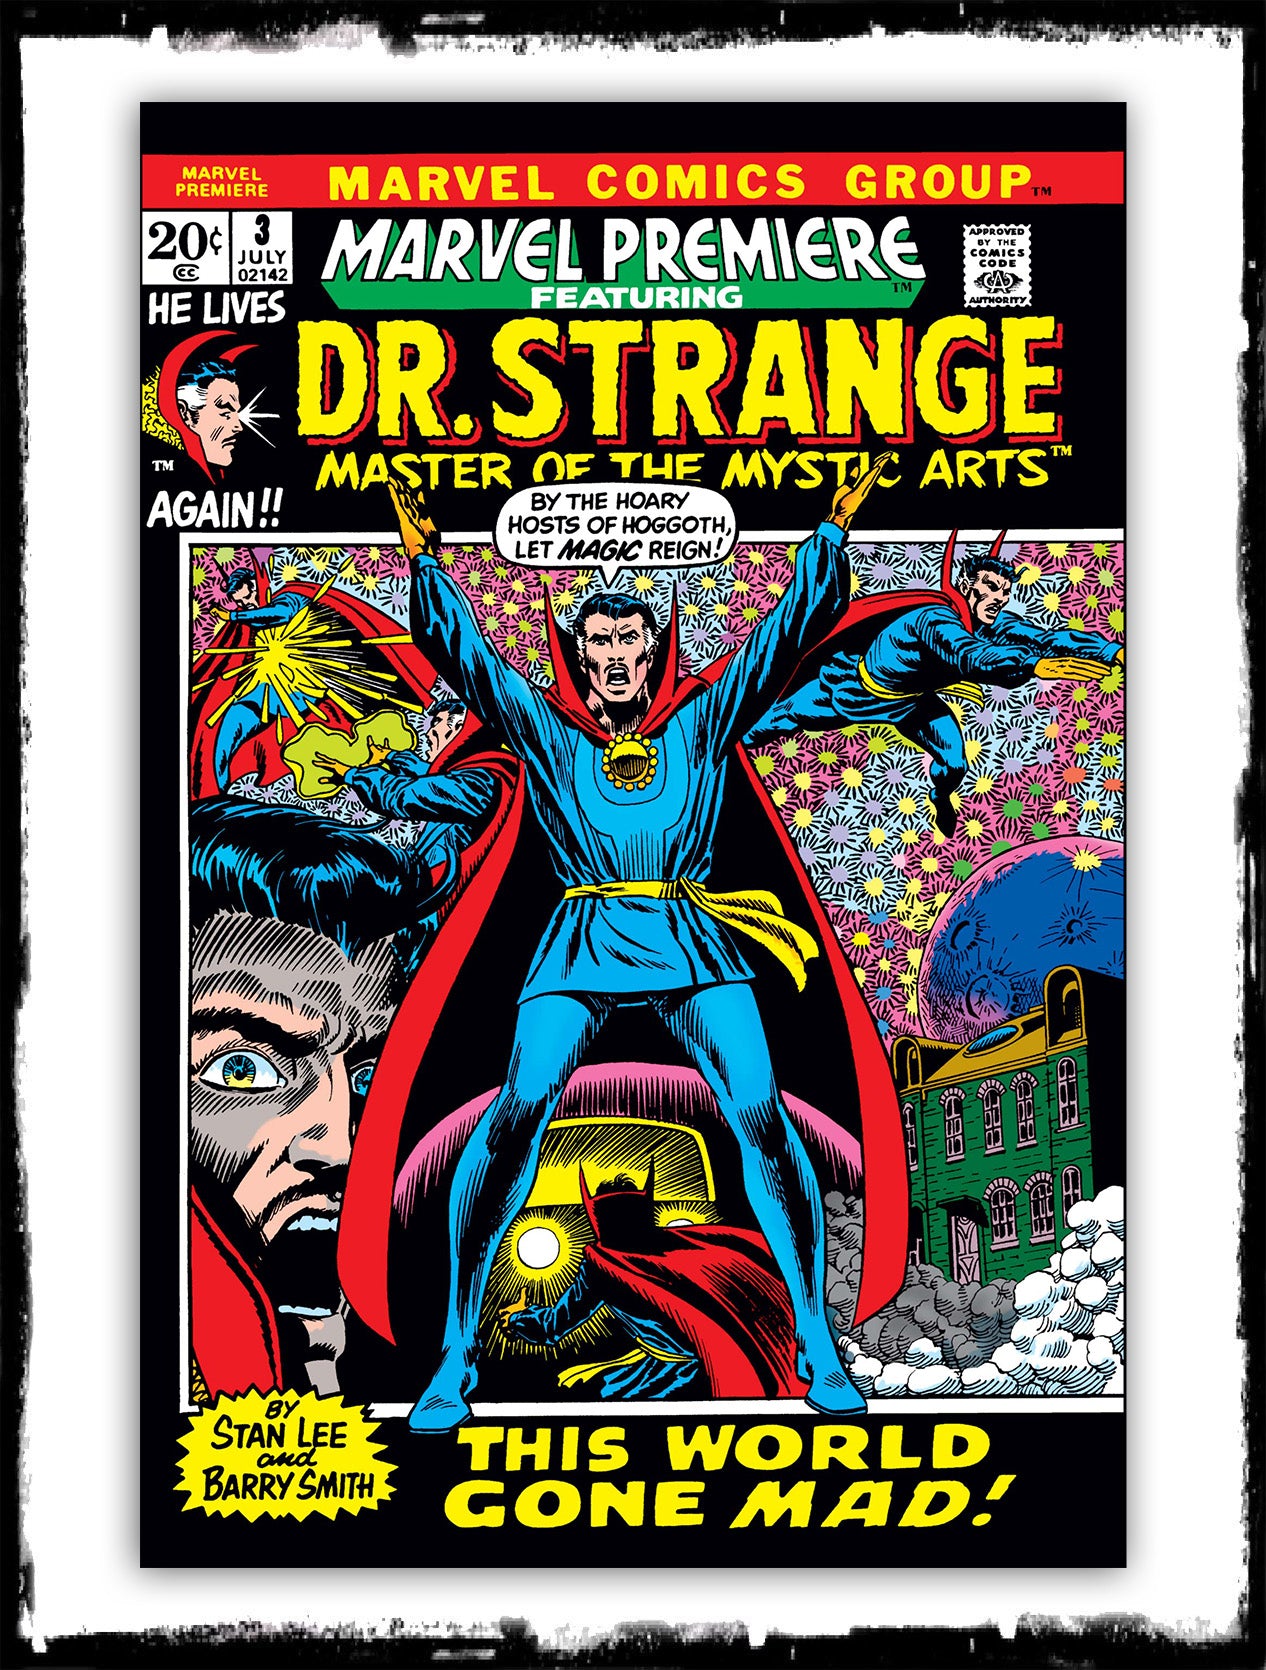 MARVEL PREMIERE - #3 'WHILE THE WORLD SPINS MAD!' (1973 - VG/FN)